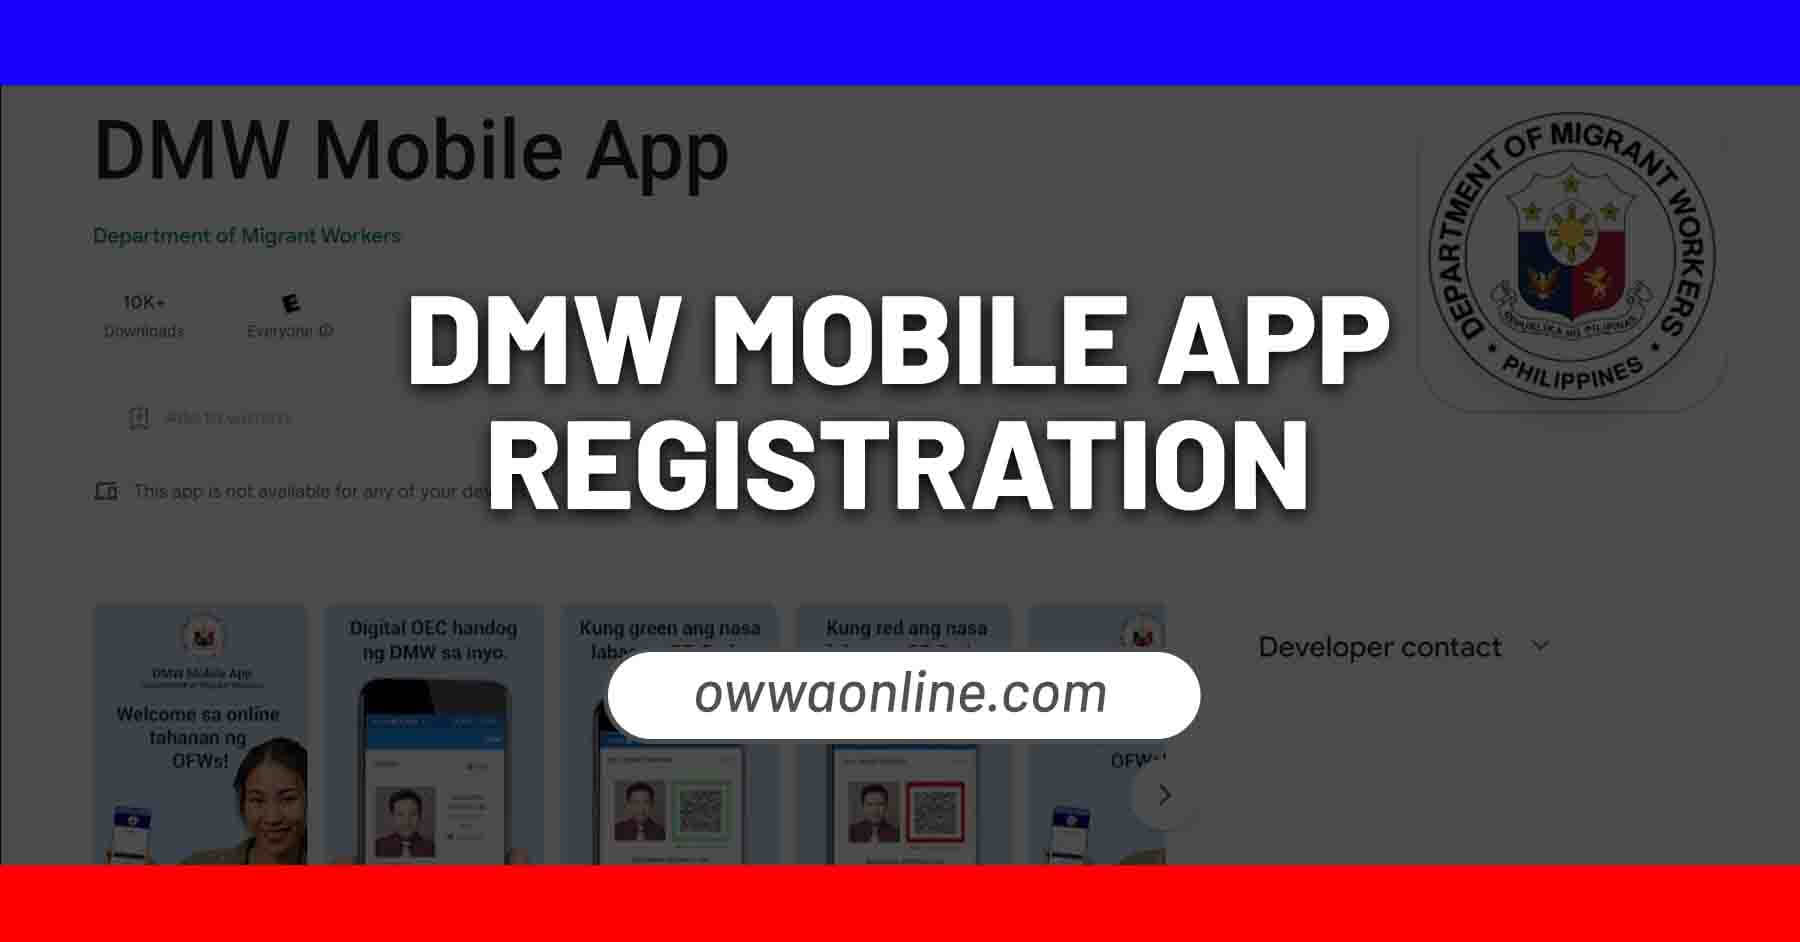 dmw mobile app registration department of migrant workers